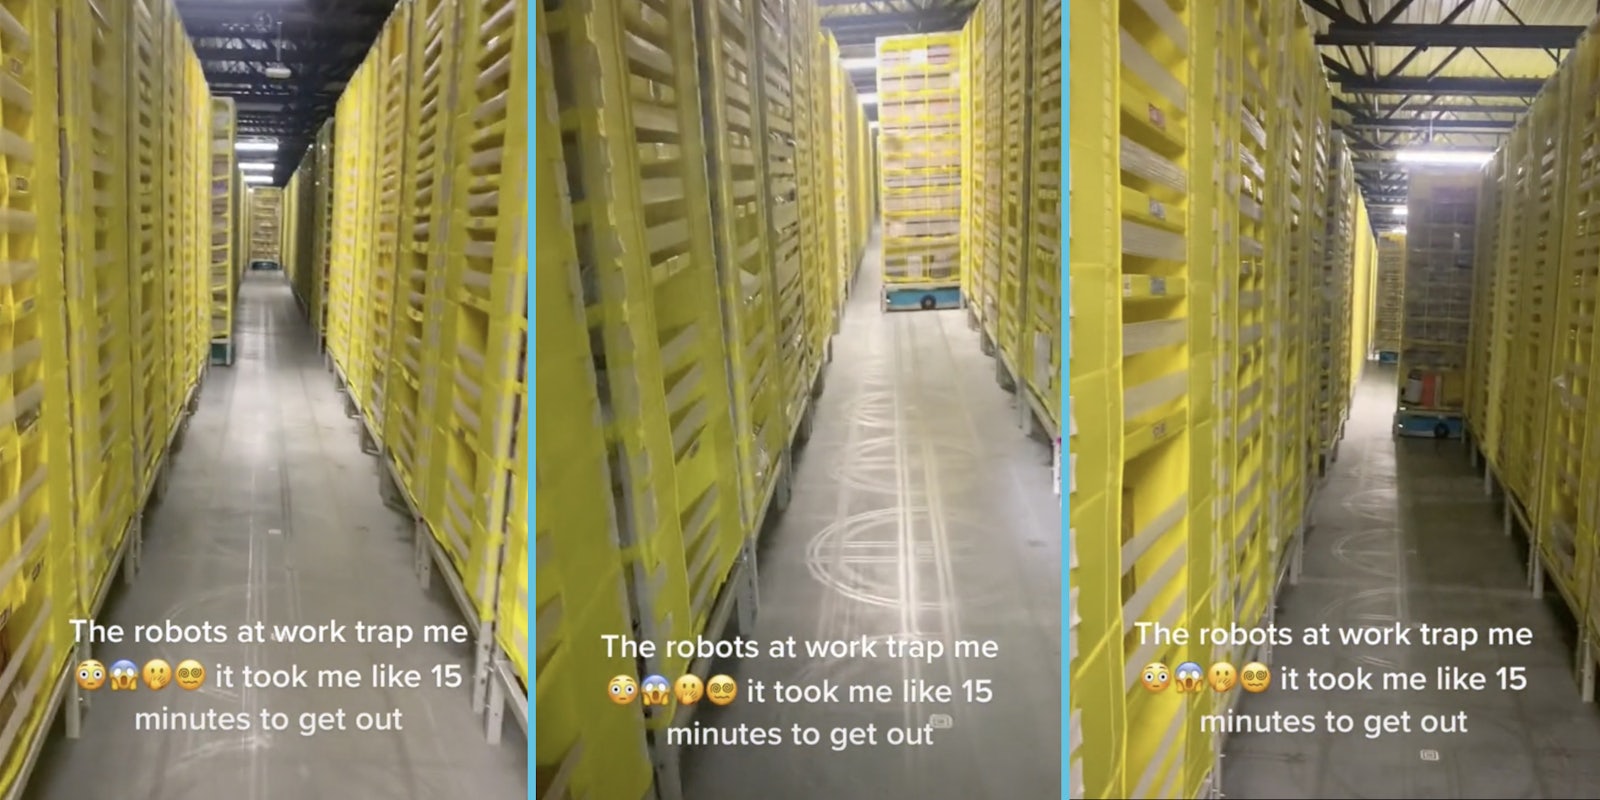 'The robots at work trap me [emojis] it took me 15 minutes to get out' featuring Amazon robot pod shelves